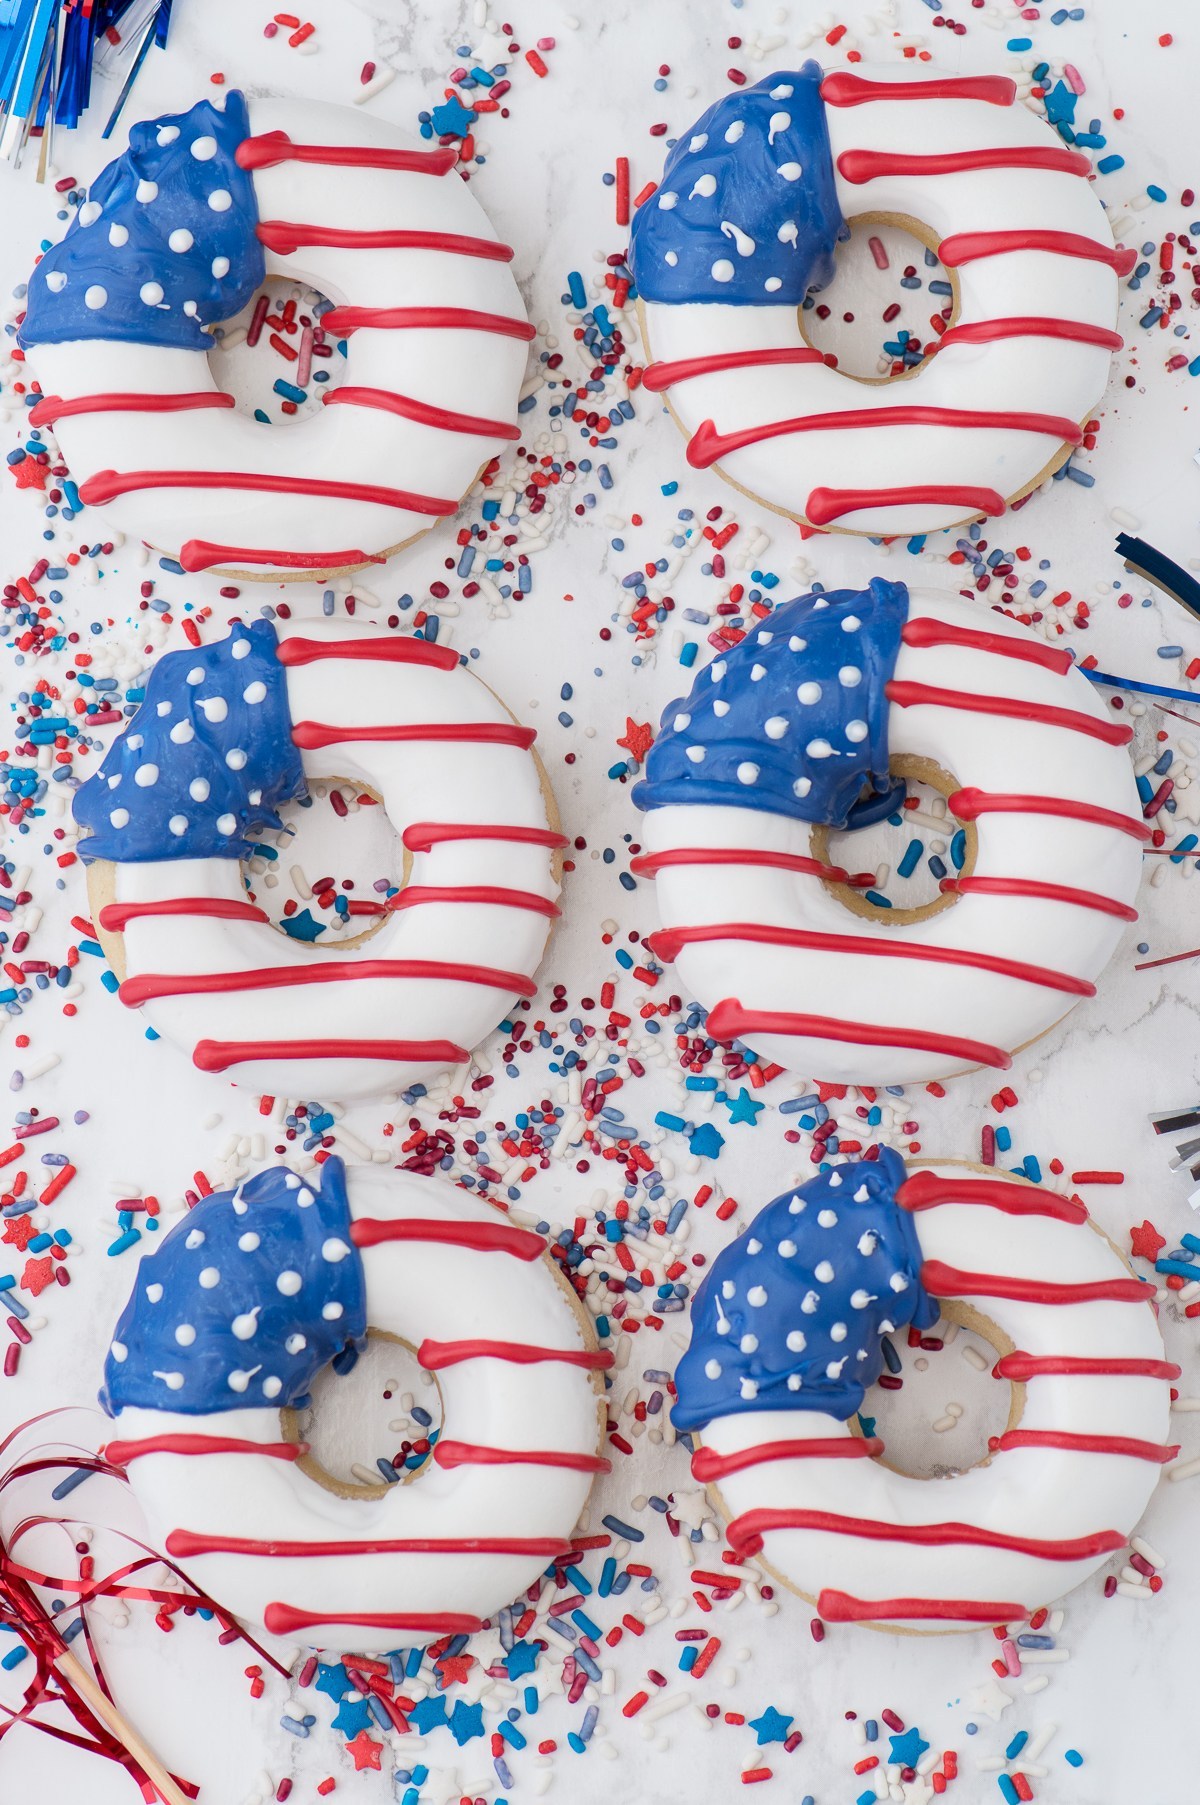 American Flag Donuts Red, White and Blue: Awesome and elegant patriotic decorations for a 4th of July theme bridal shower. // These American flag donuts are almost too pretty to eat! // mysweetengagement.com